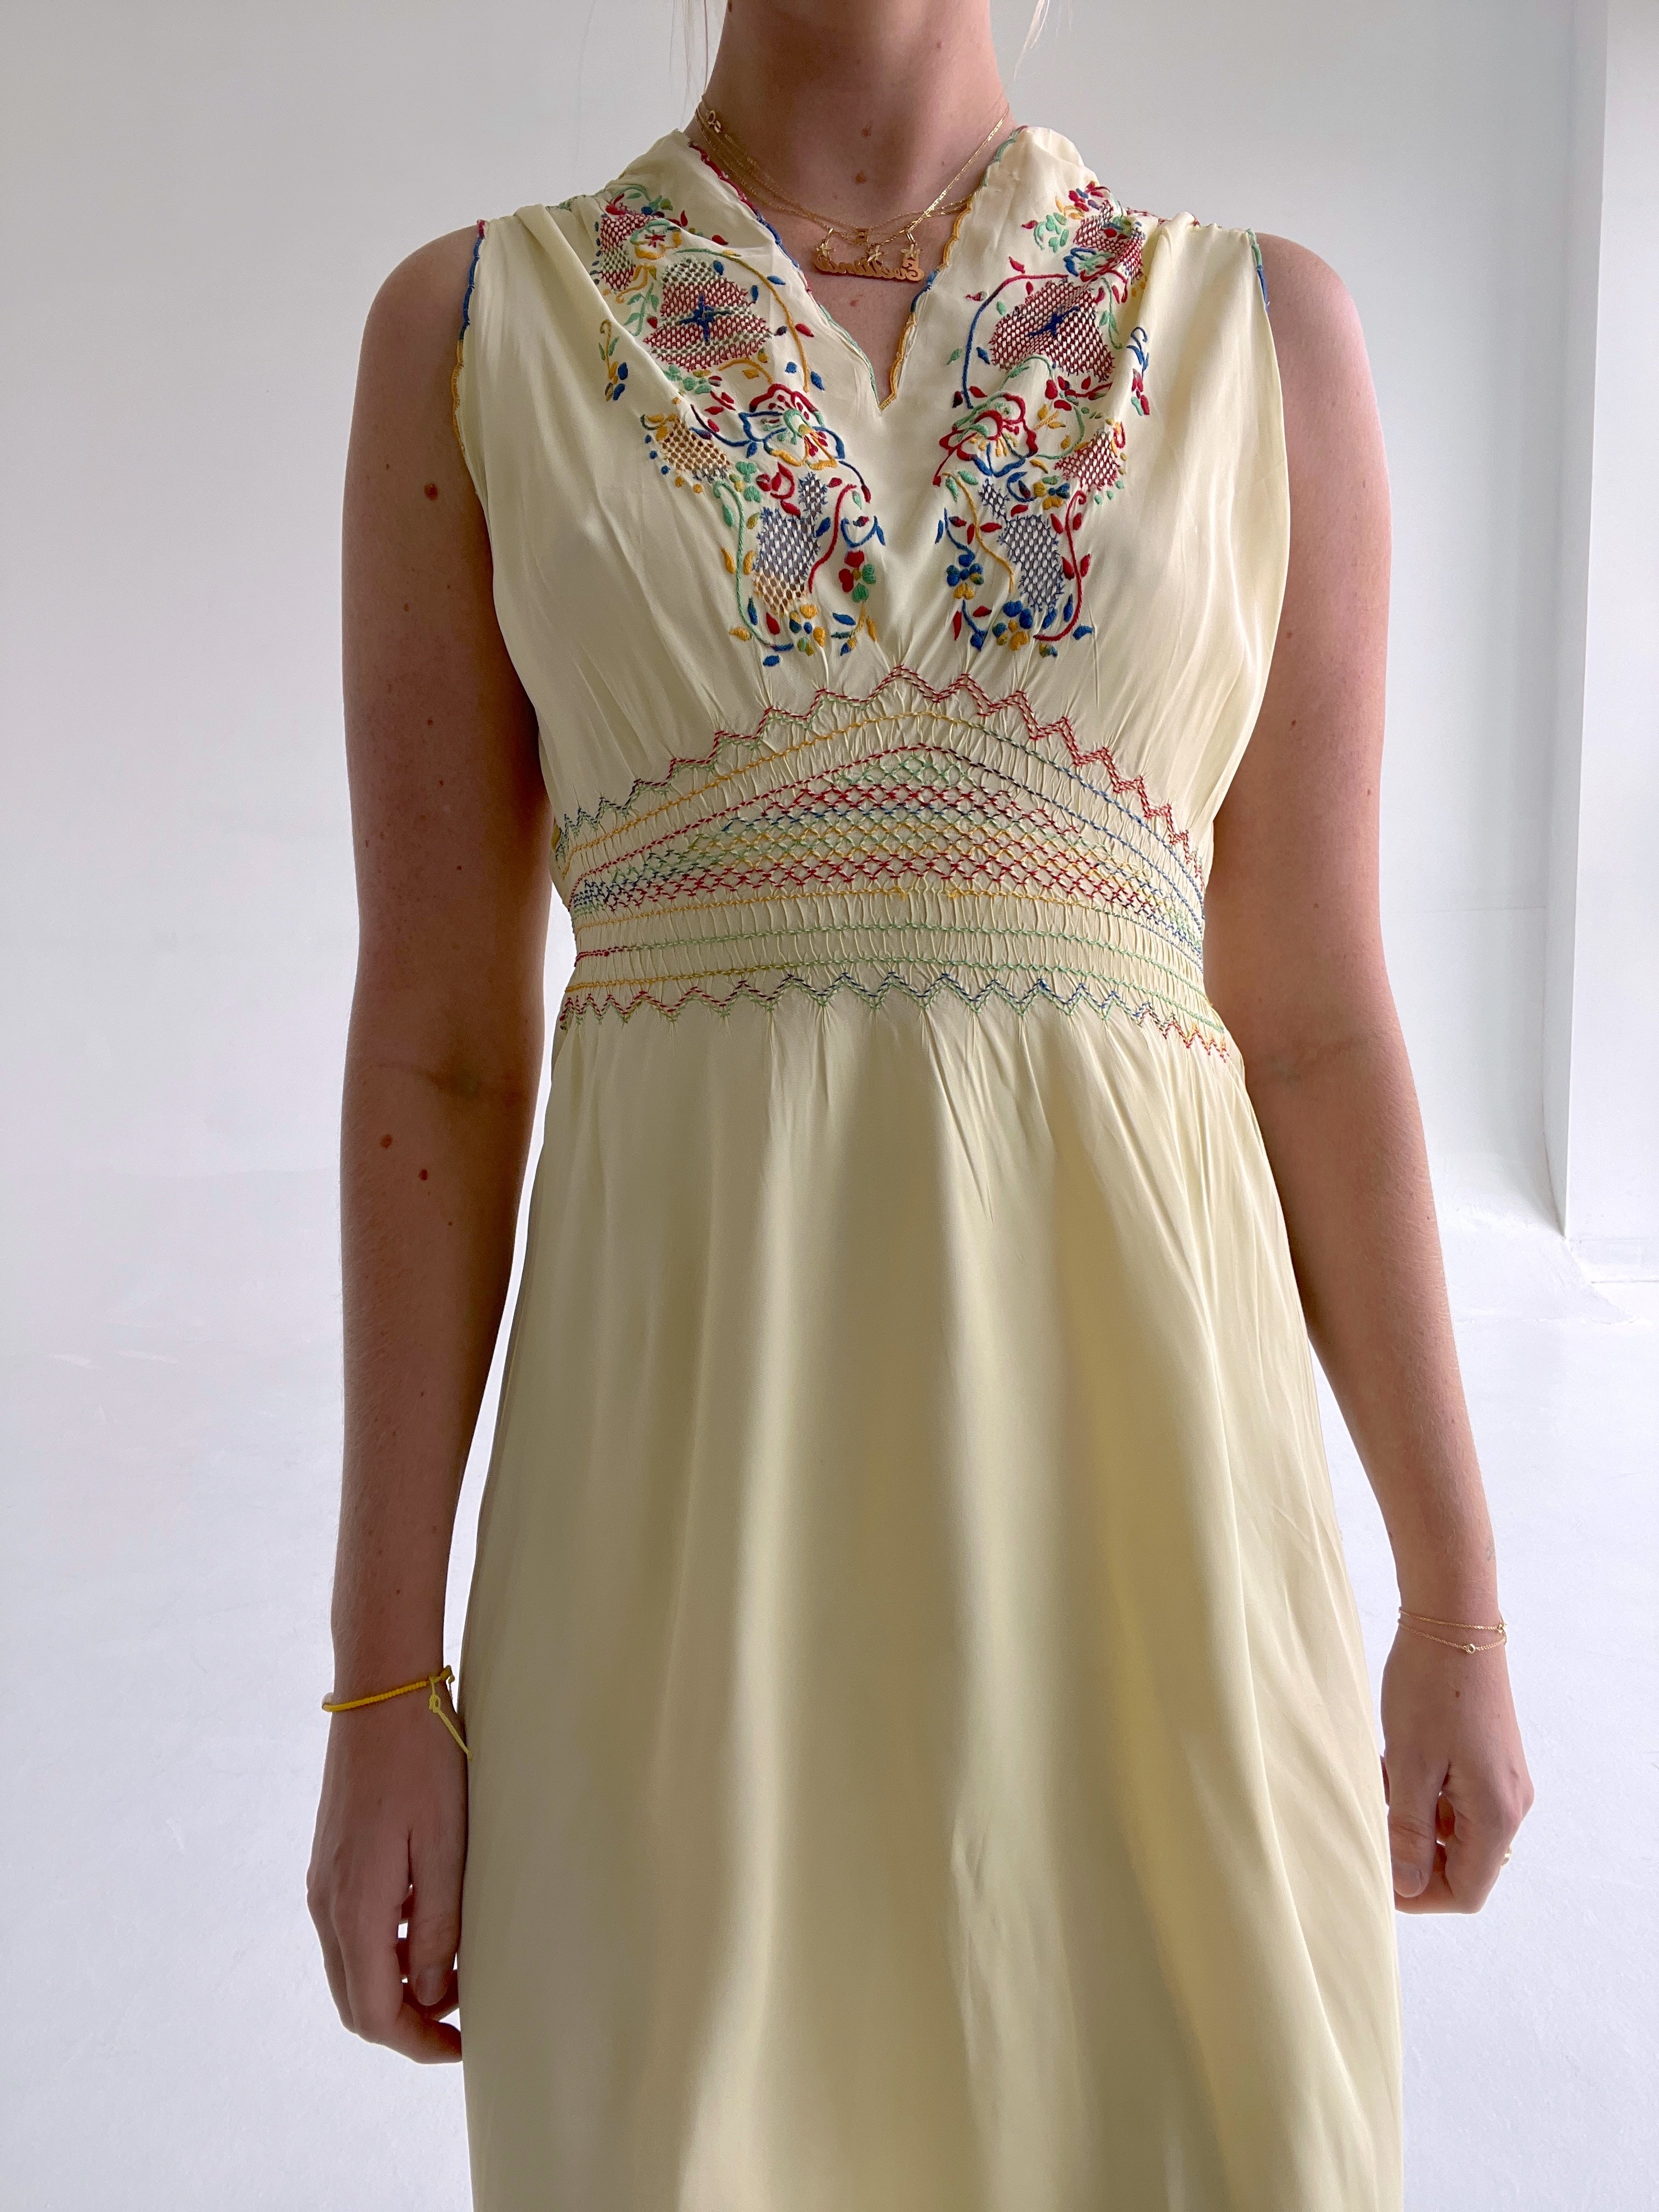 1930's Canary Yellow Dress with Multicolor Stitching